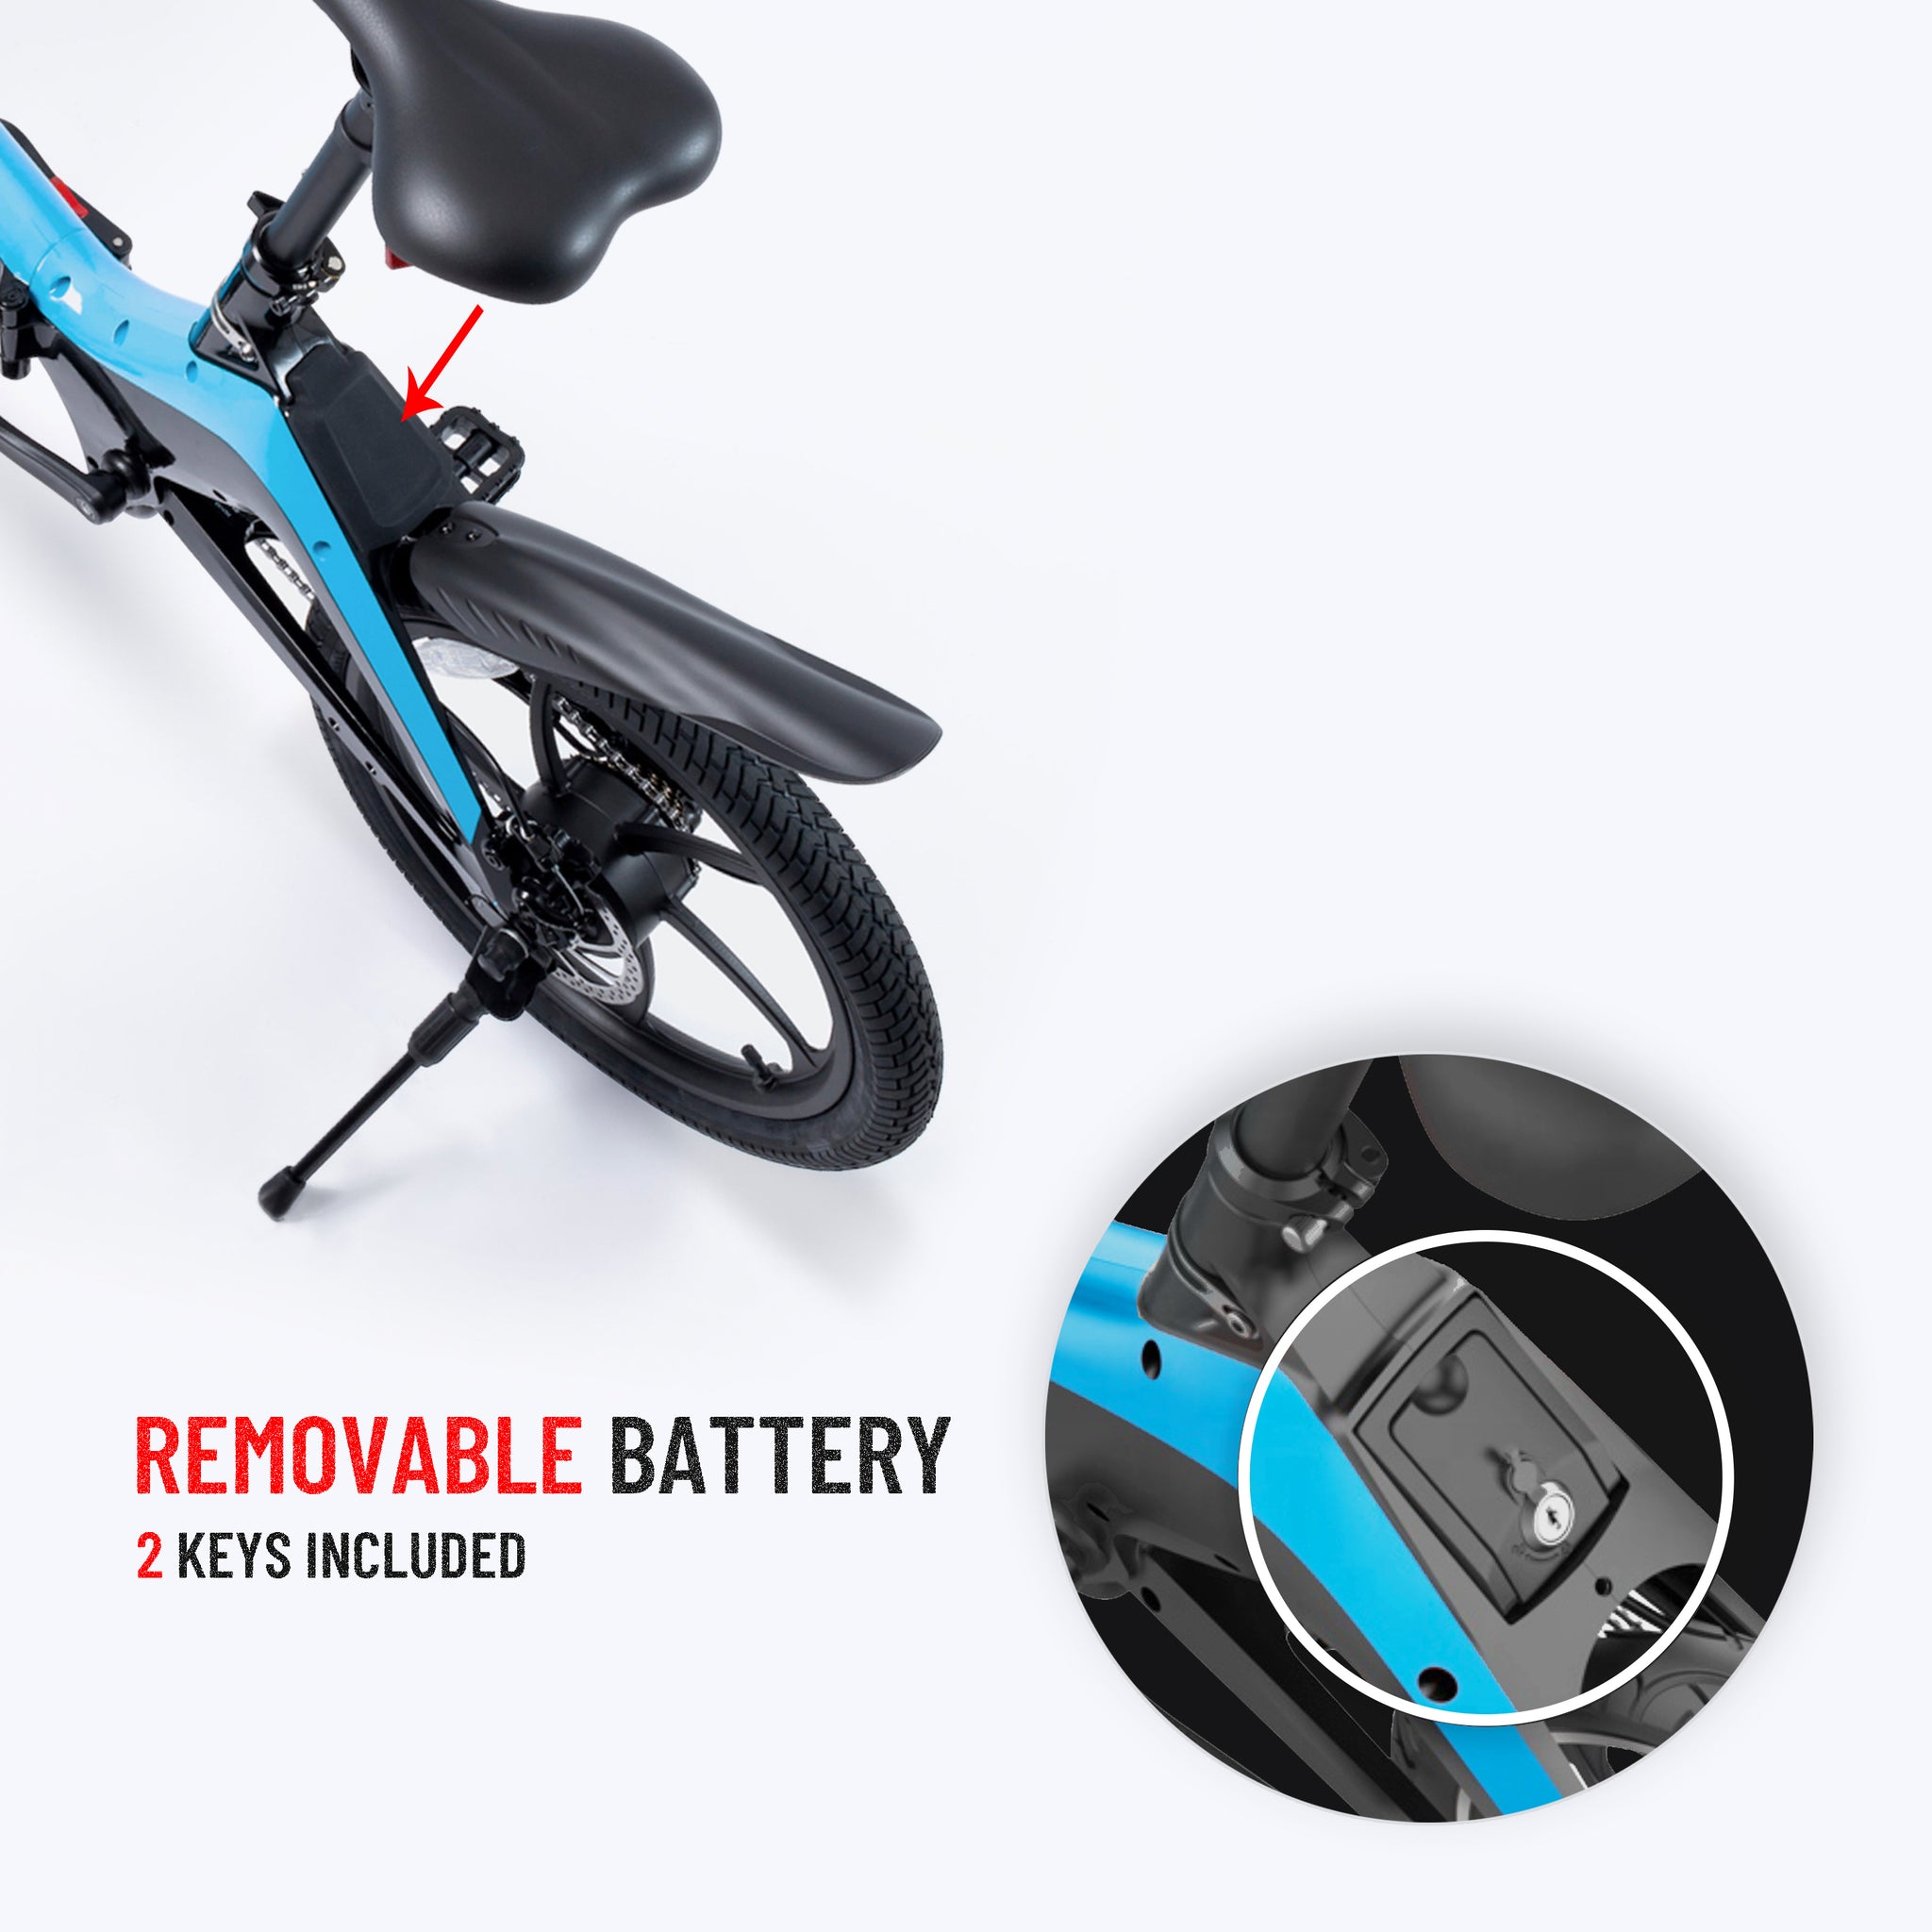 Ridezar Rapid X20 Electric Bike With Removable Battery